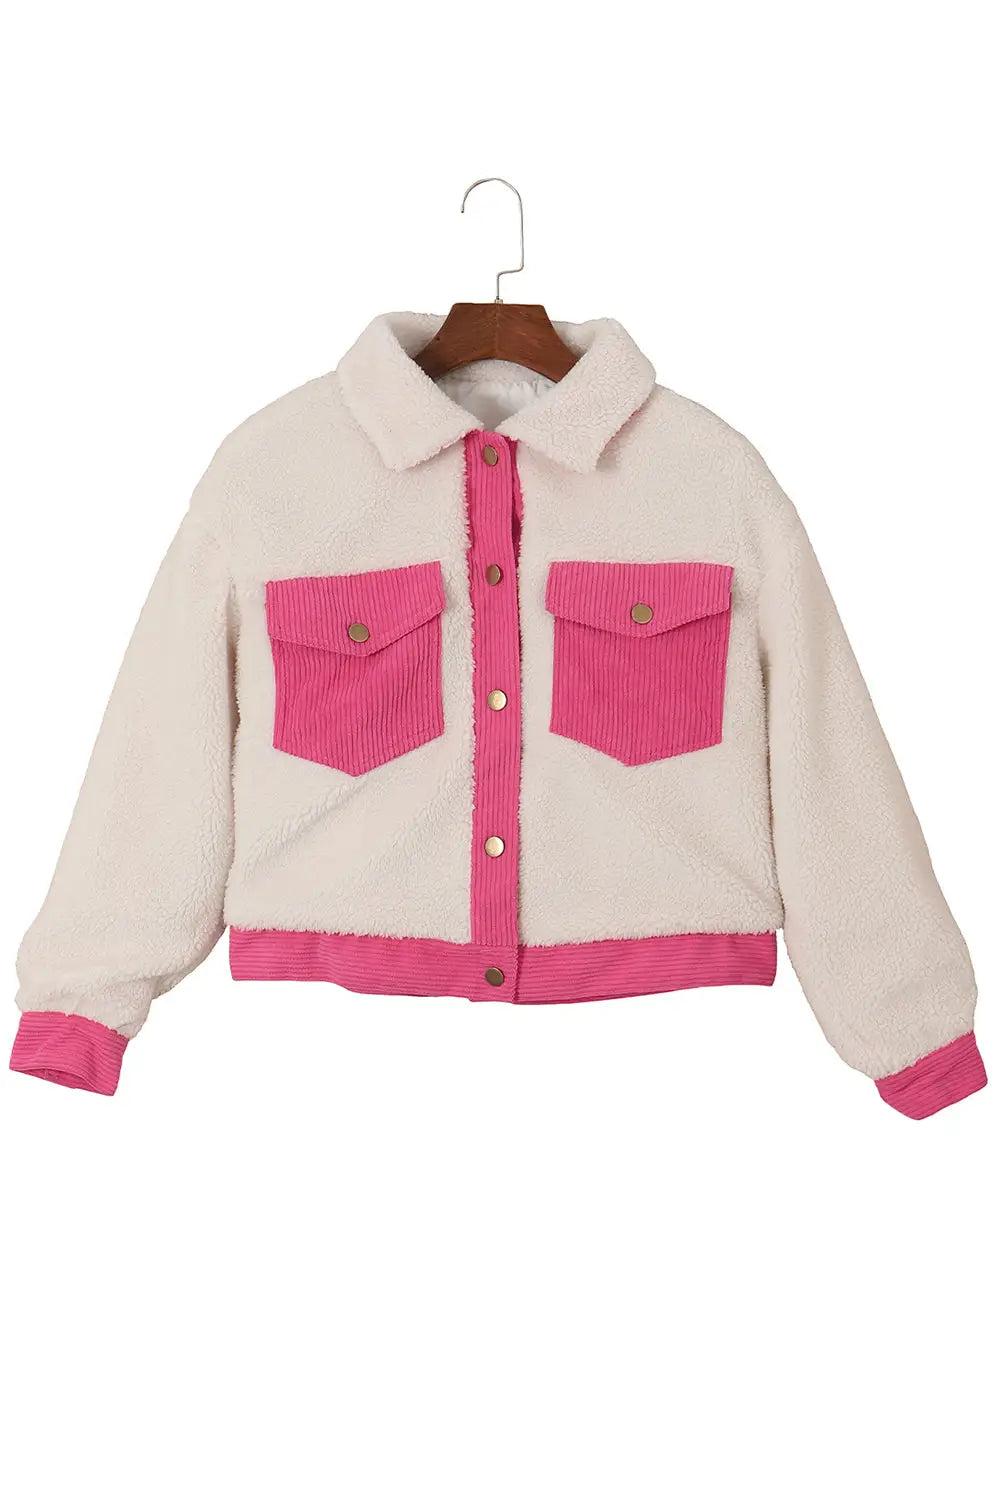 Multicolor sherpa corduroy patchwork button up crop jacket - cropped jackets